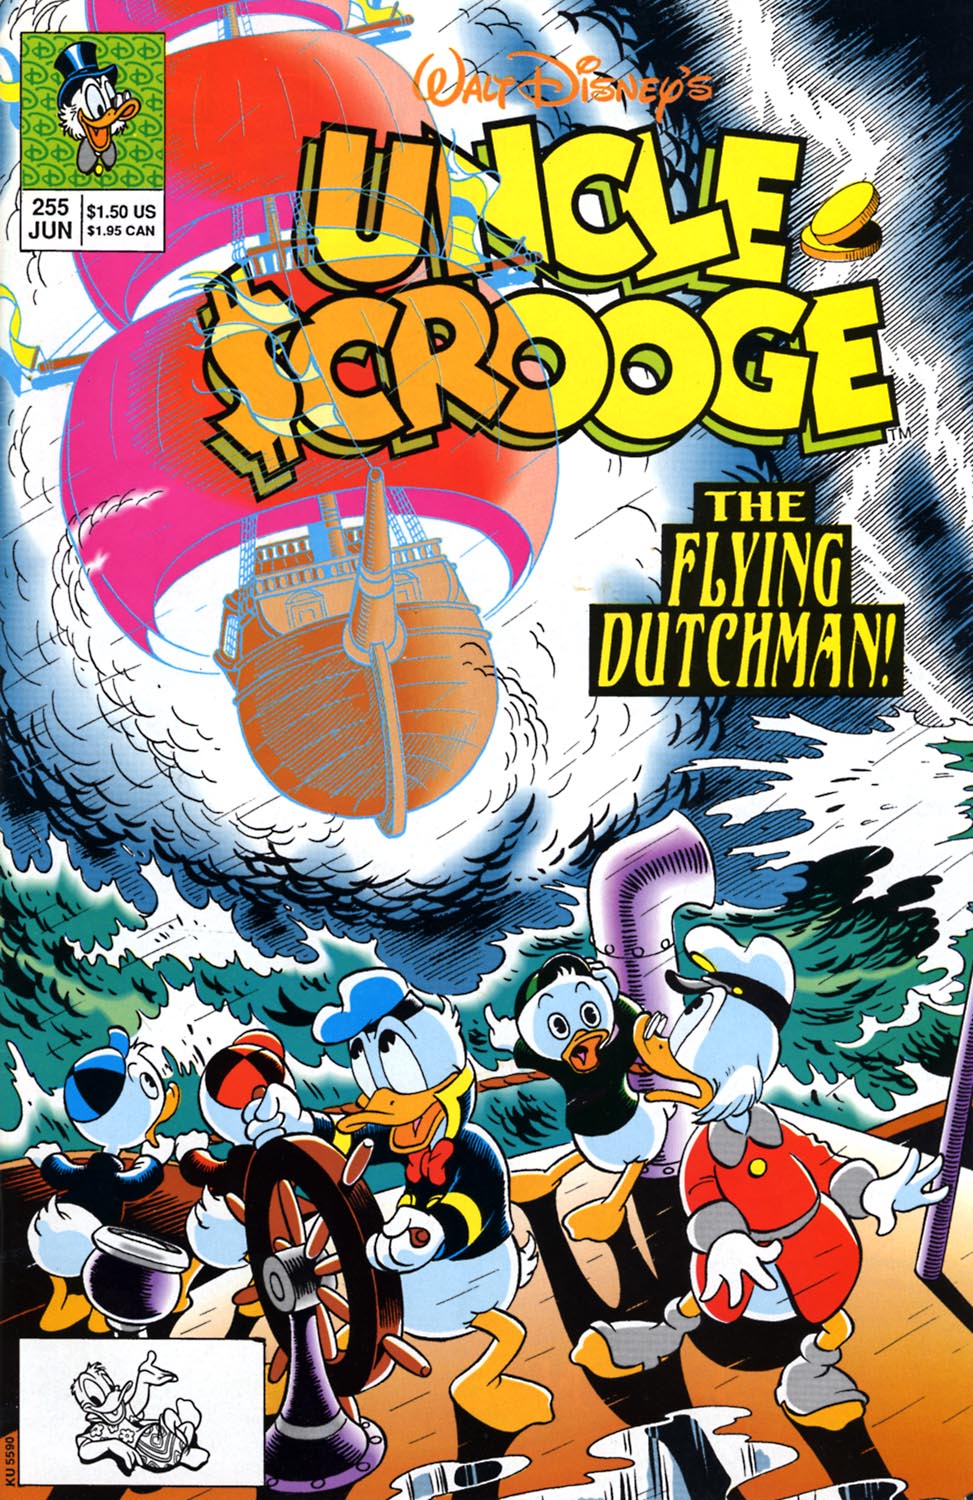 Read online Uncle Scrooge (1953) comic -  Issue #255 - 1